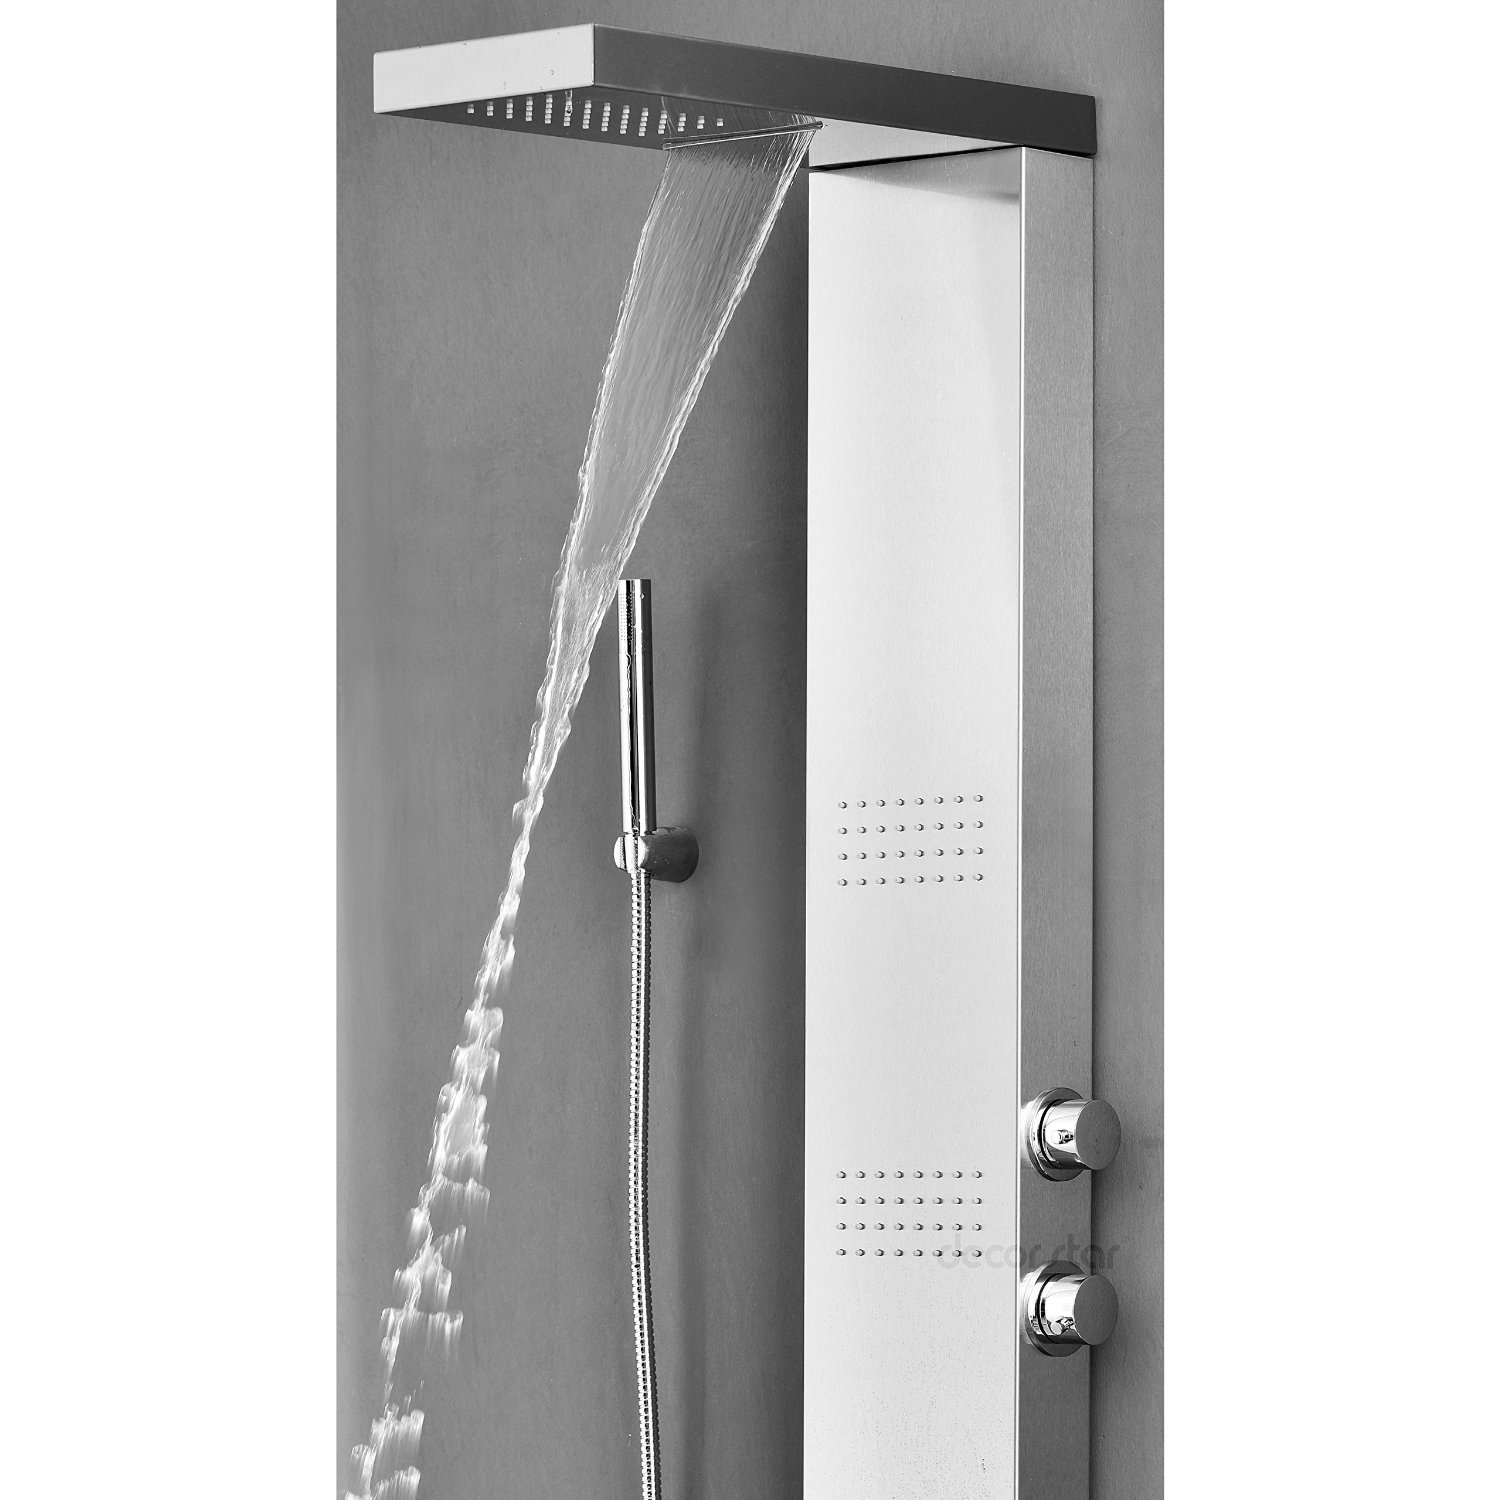 Alberni Stainless Steel Shower Panel with Massage Jets & Hand Shower